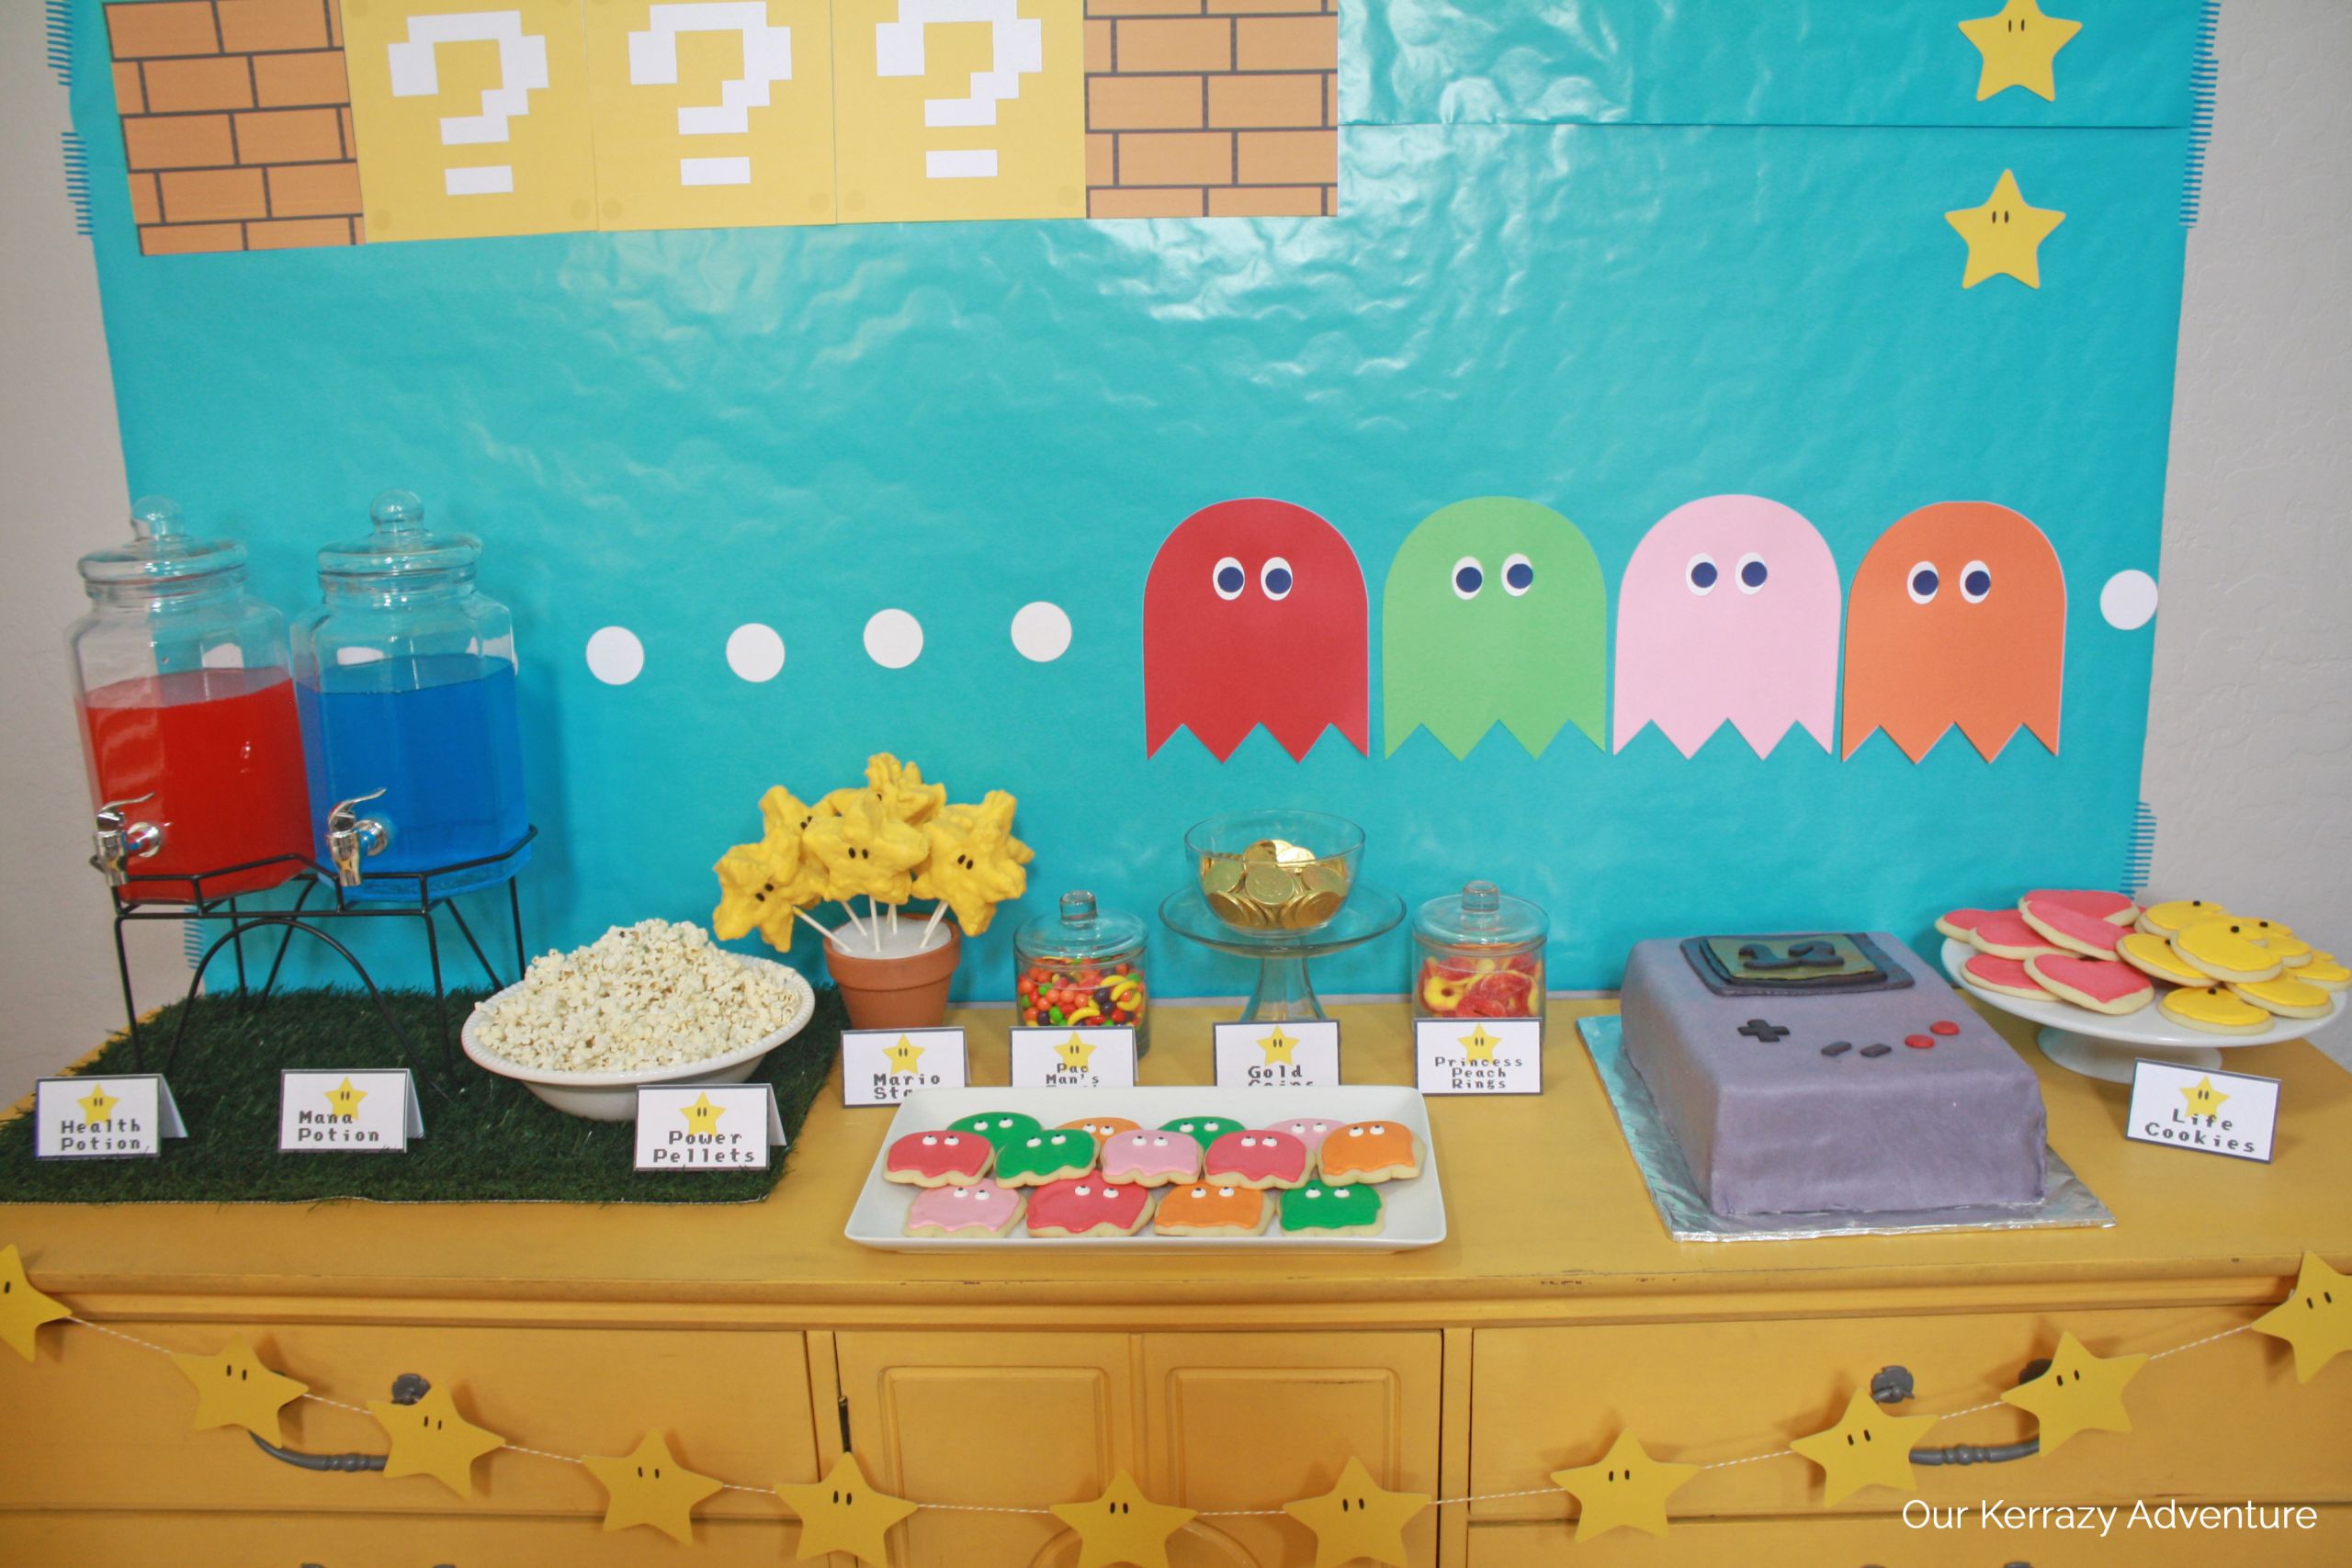 Video Game Birthday Party Ideas
 Retro Video Game Birthday Party Our Kerrazy Adventure